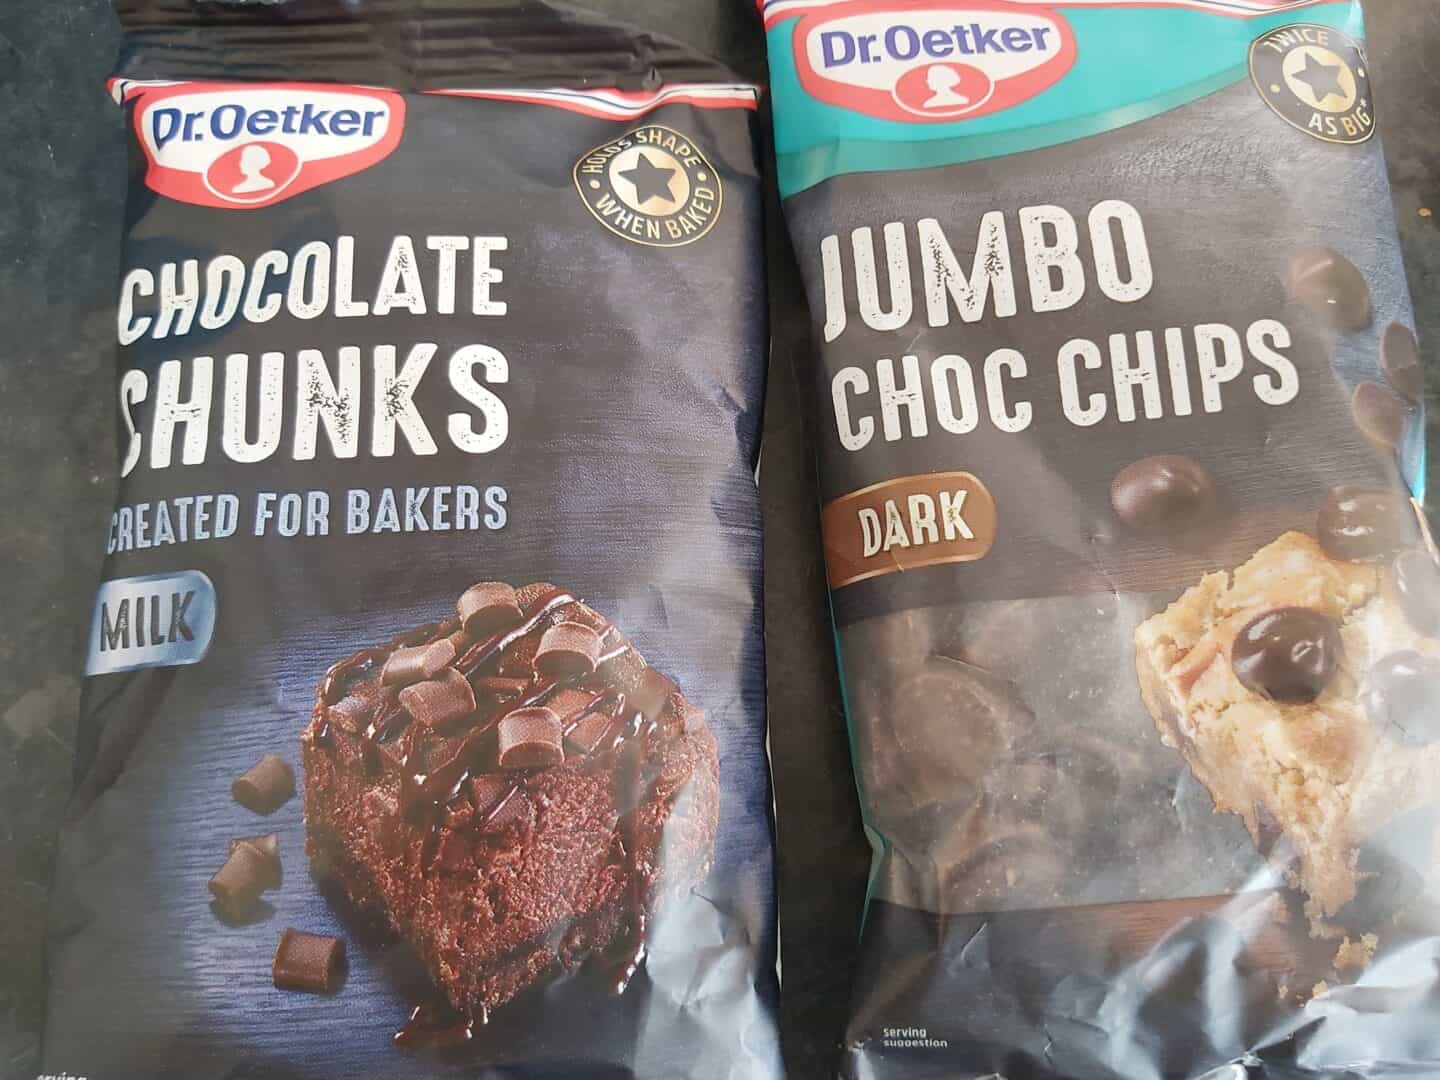 Dr Oetker chocolate chips and chocolate chunks